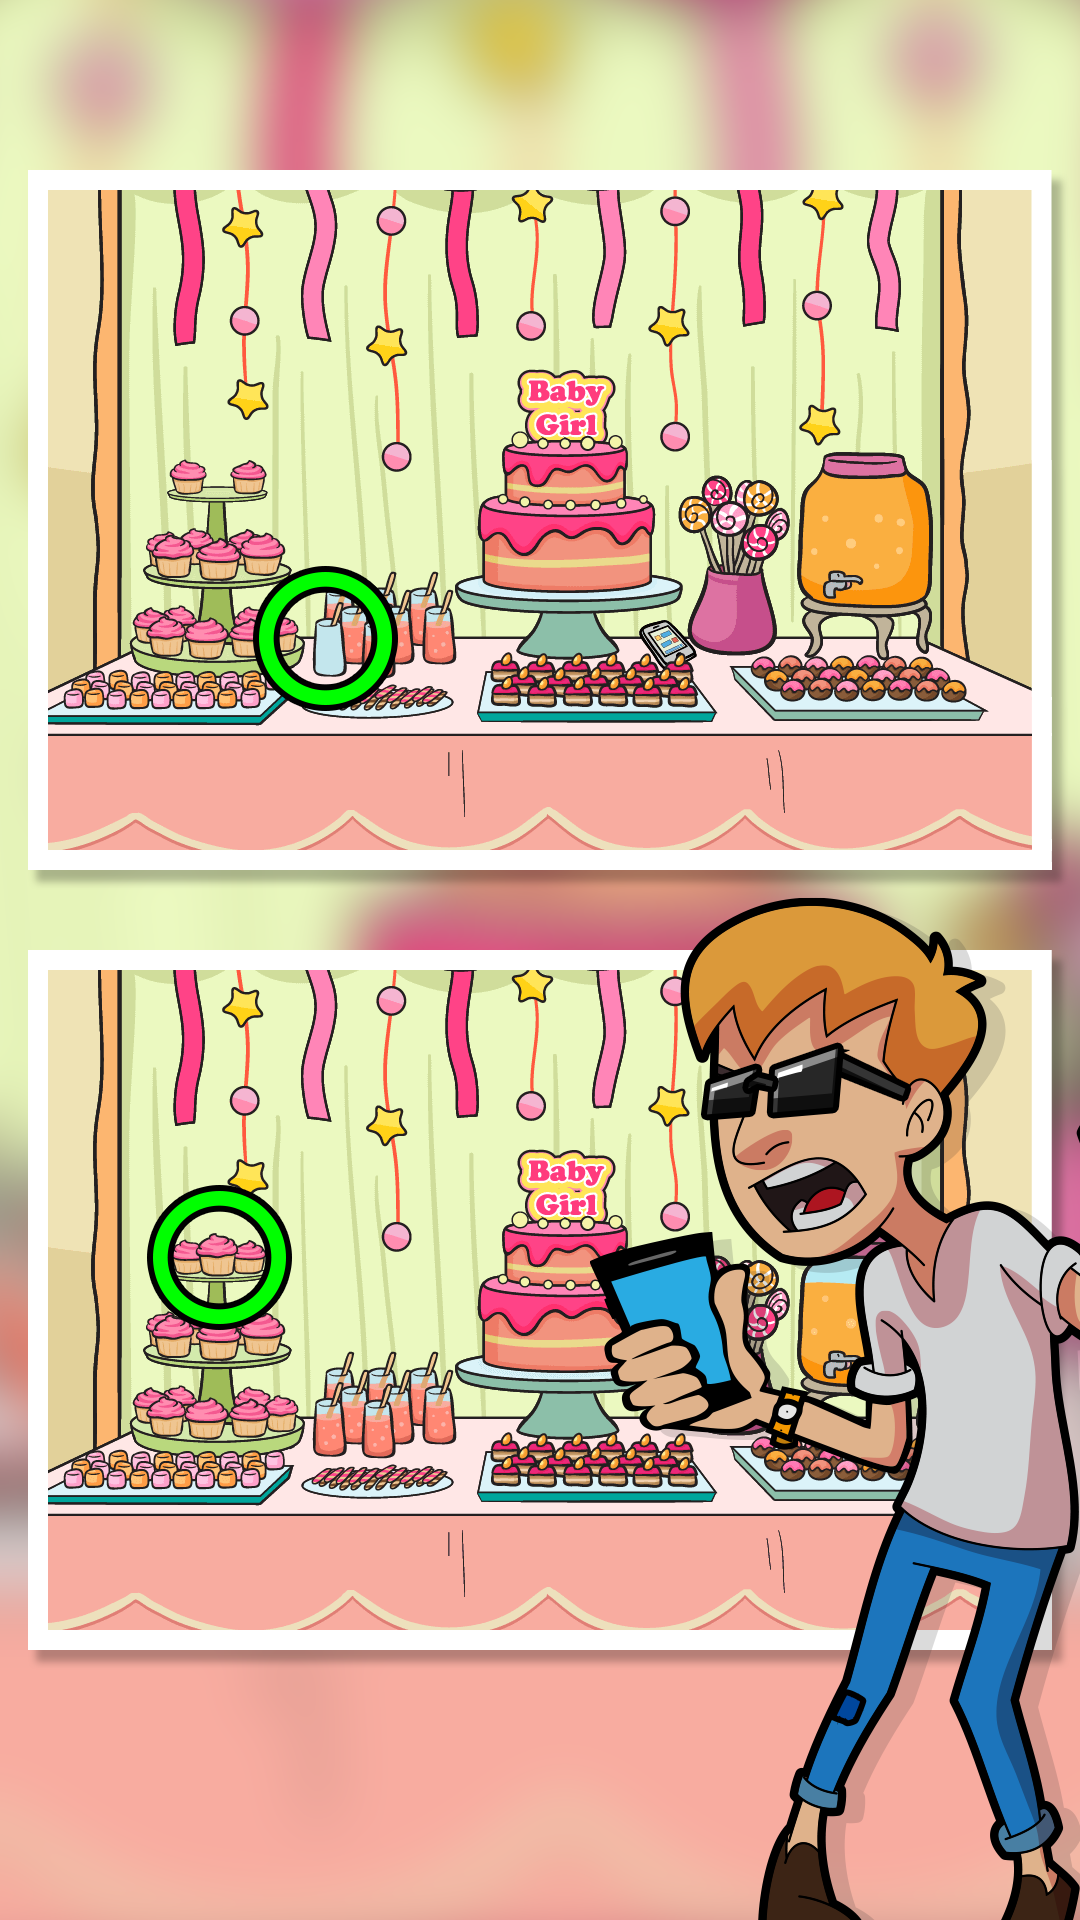 Find The Differences - Online for Android